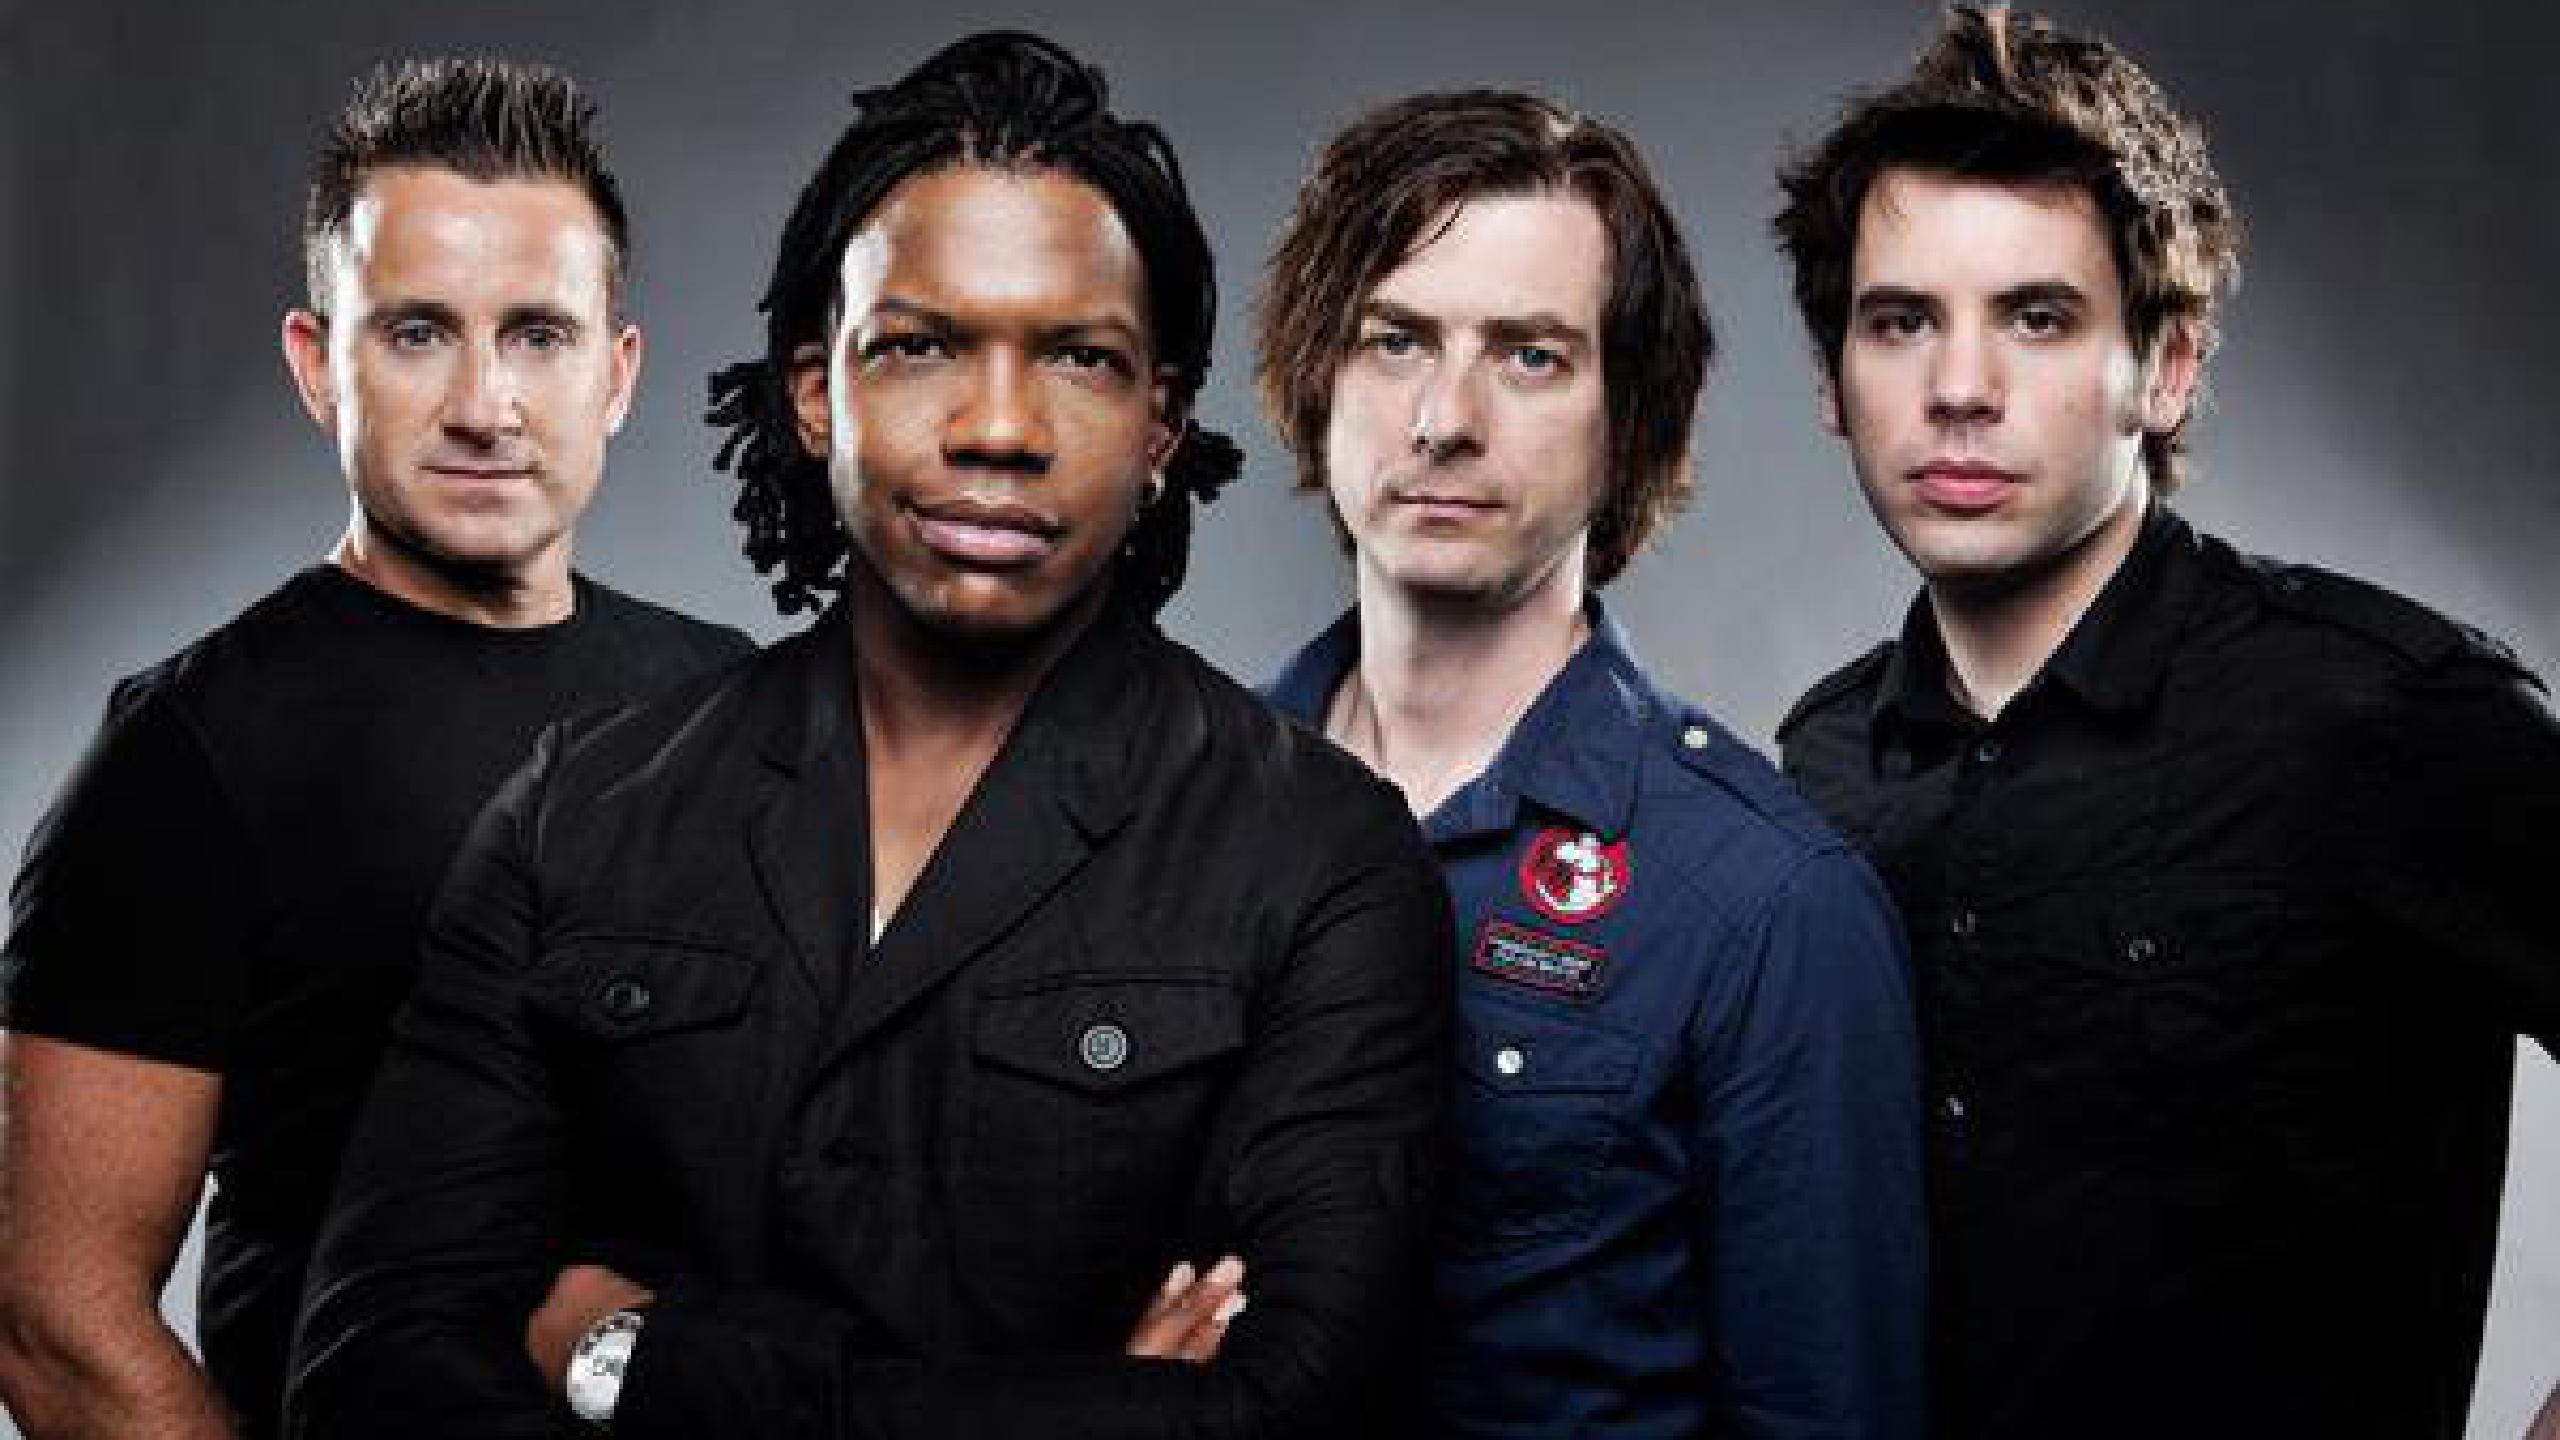 Newsboys tour dates 2022 2023. Newsboys tickets and concerts | Wegow United States